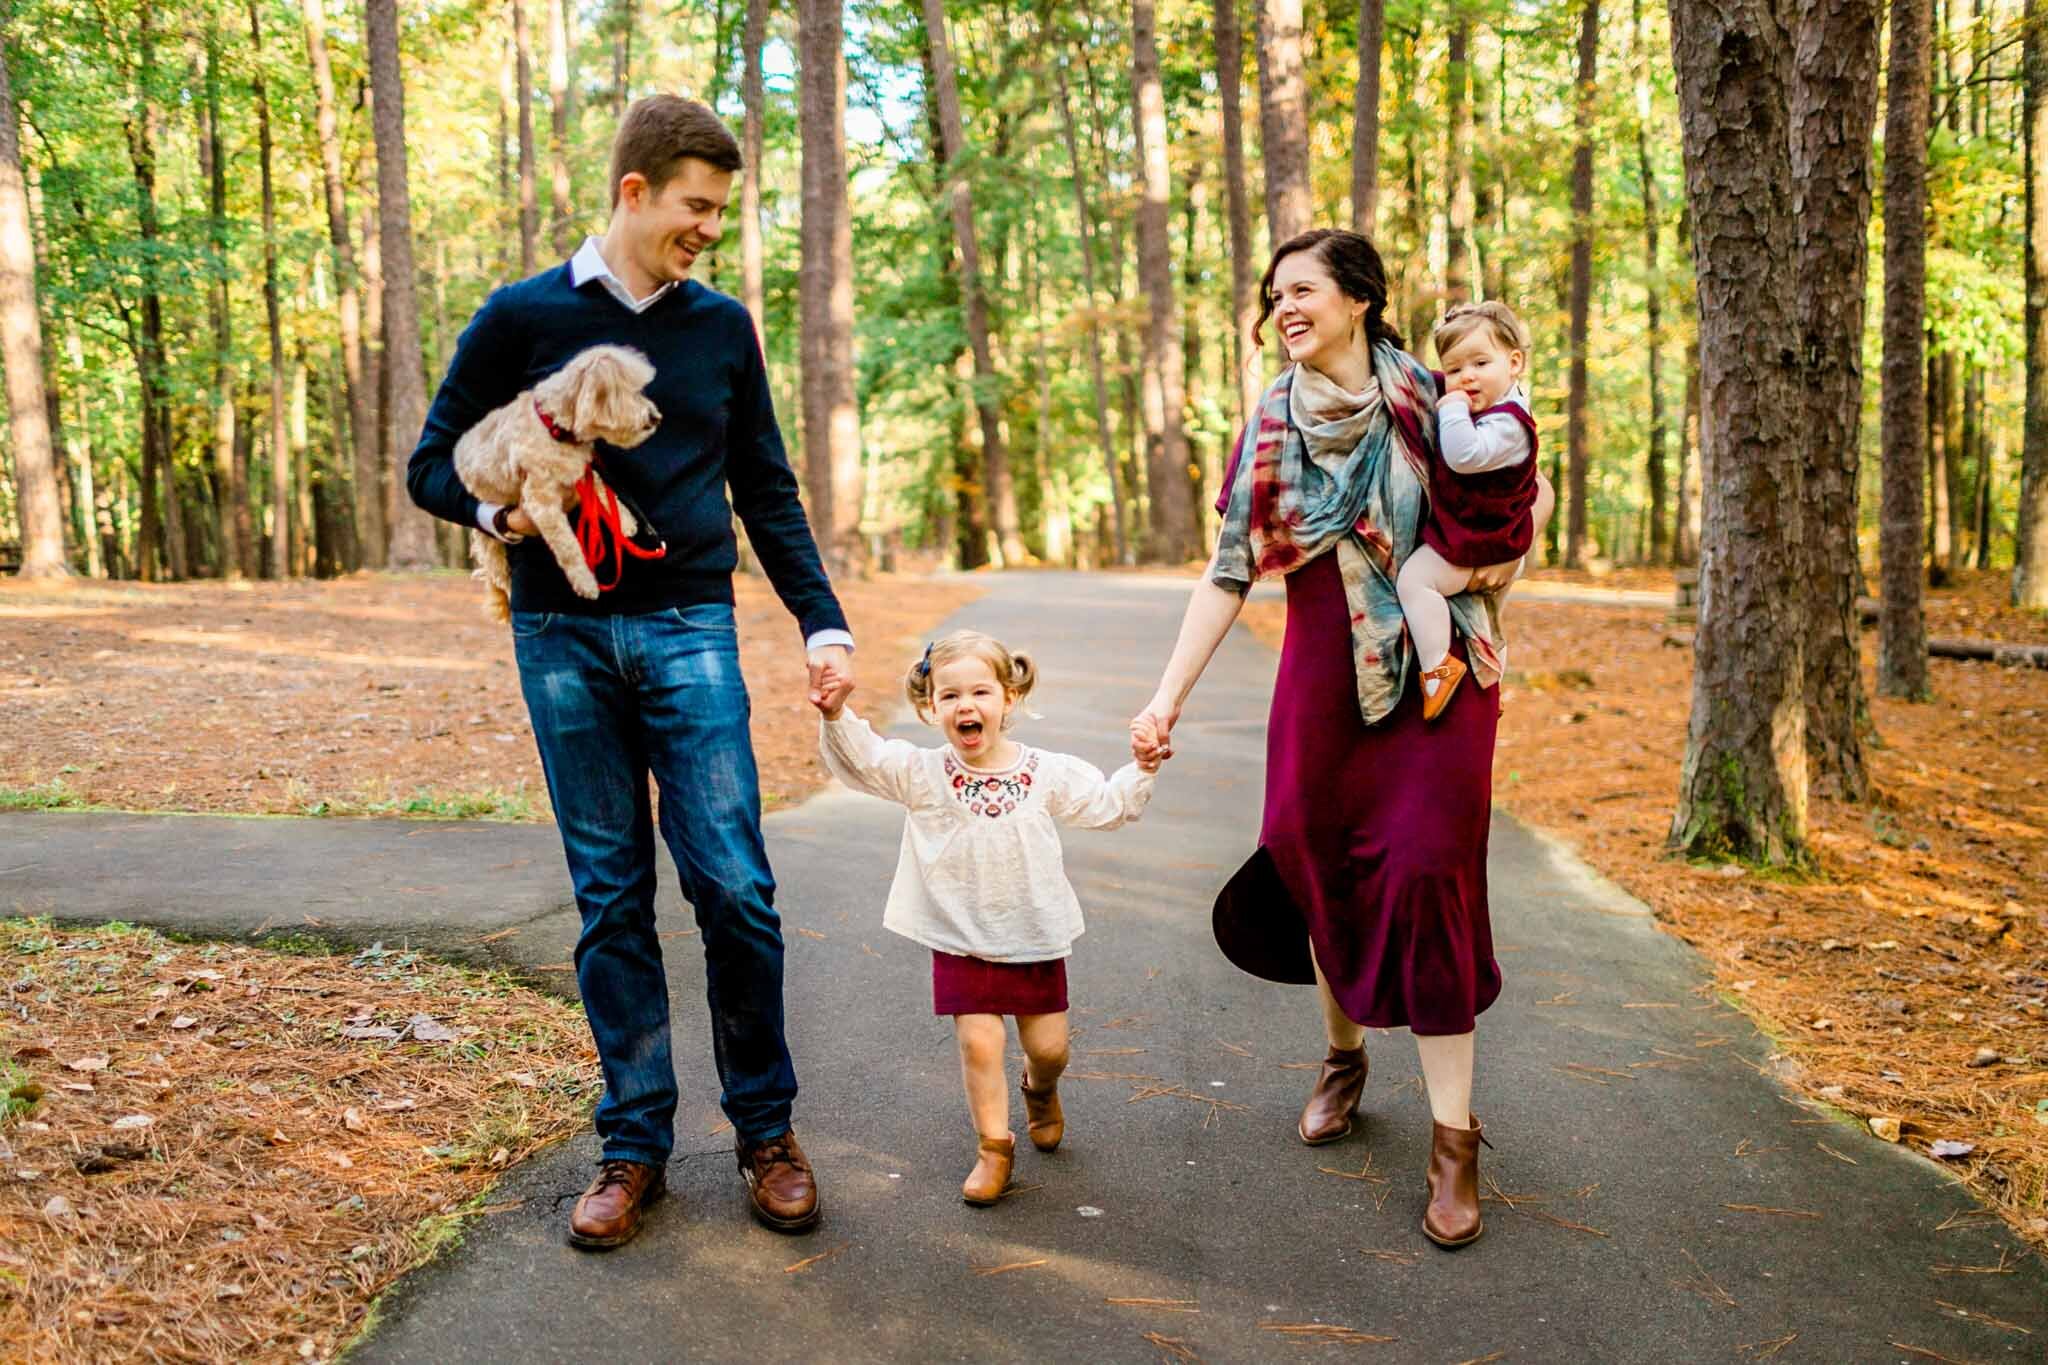 Raleigh Family Photographer | By G. Lin Photography | Umstead Park | Family walking on paved path in forest